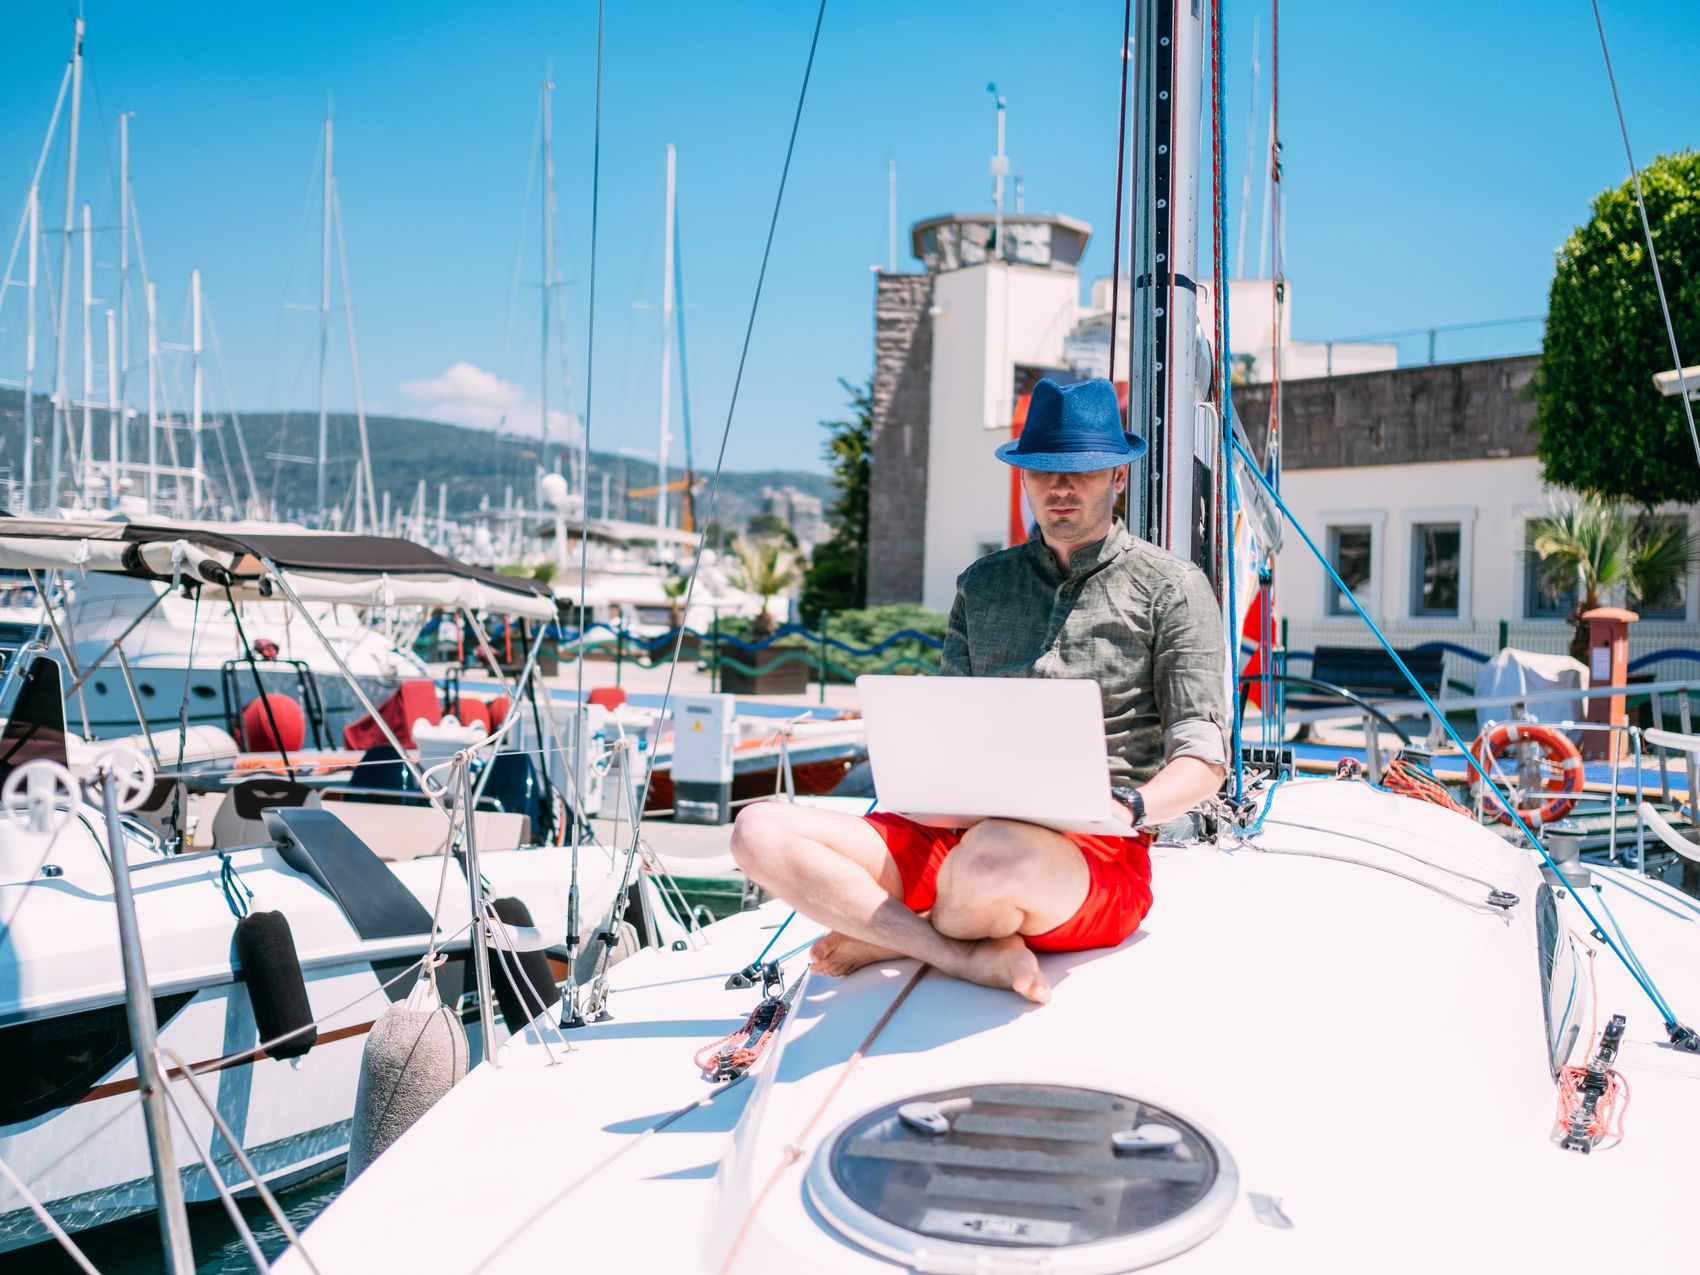 Sailing trip essentials - What to pack on your next boat trip?